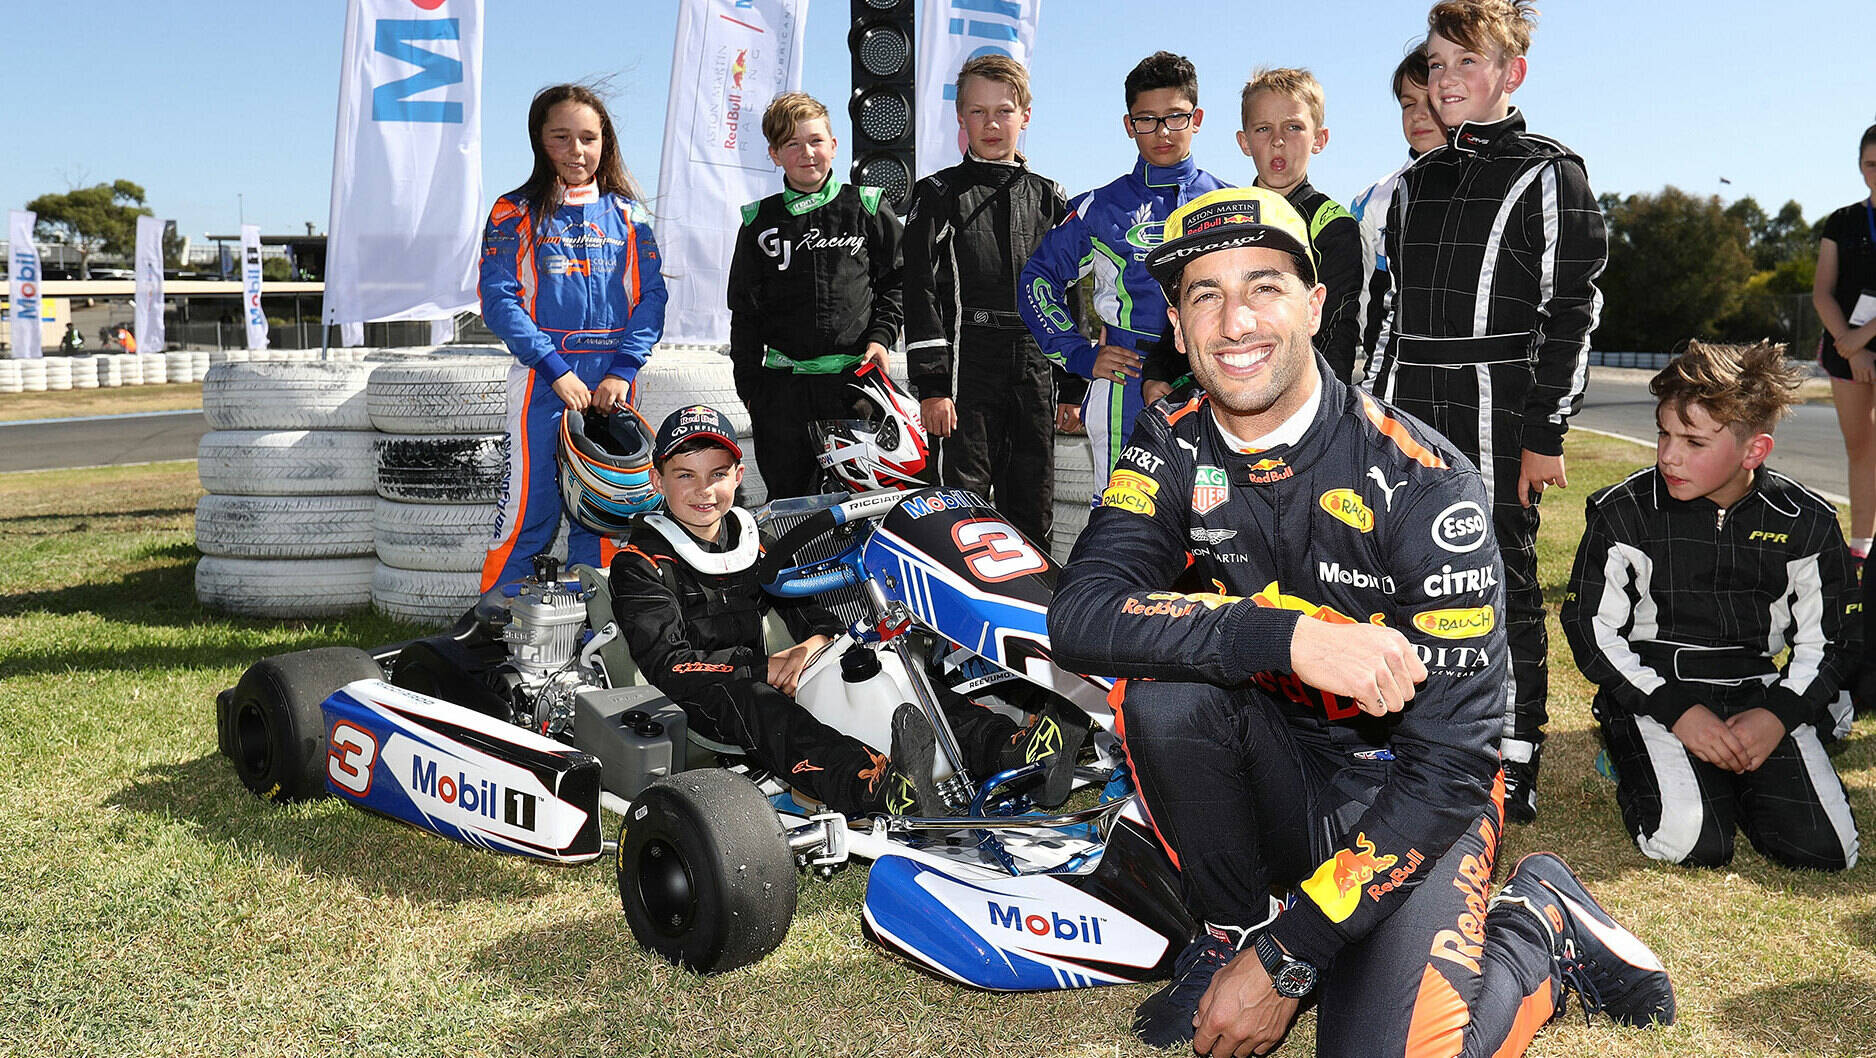 Image Photo F1 star Daniel Ricciardo recently joined young racers at Port Melbourne to share his experiences behind the wheel.